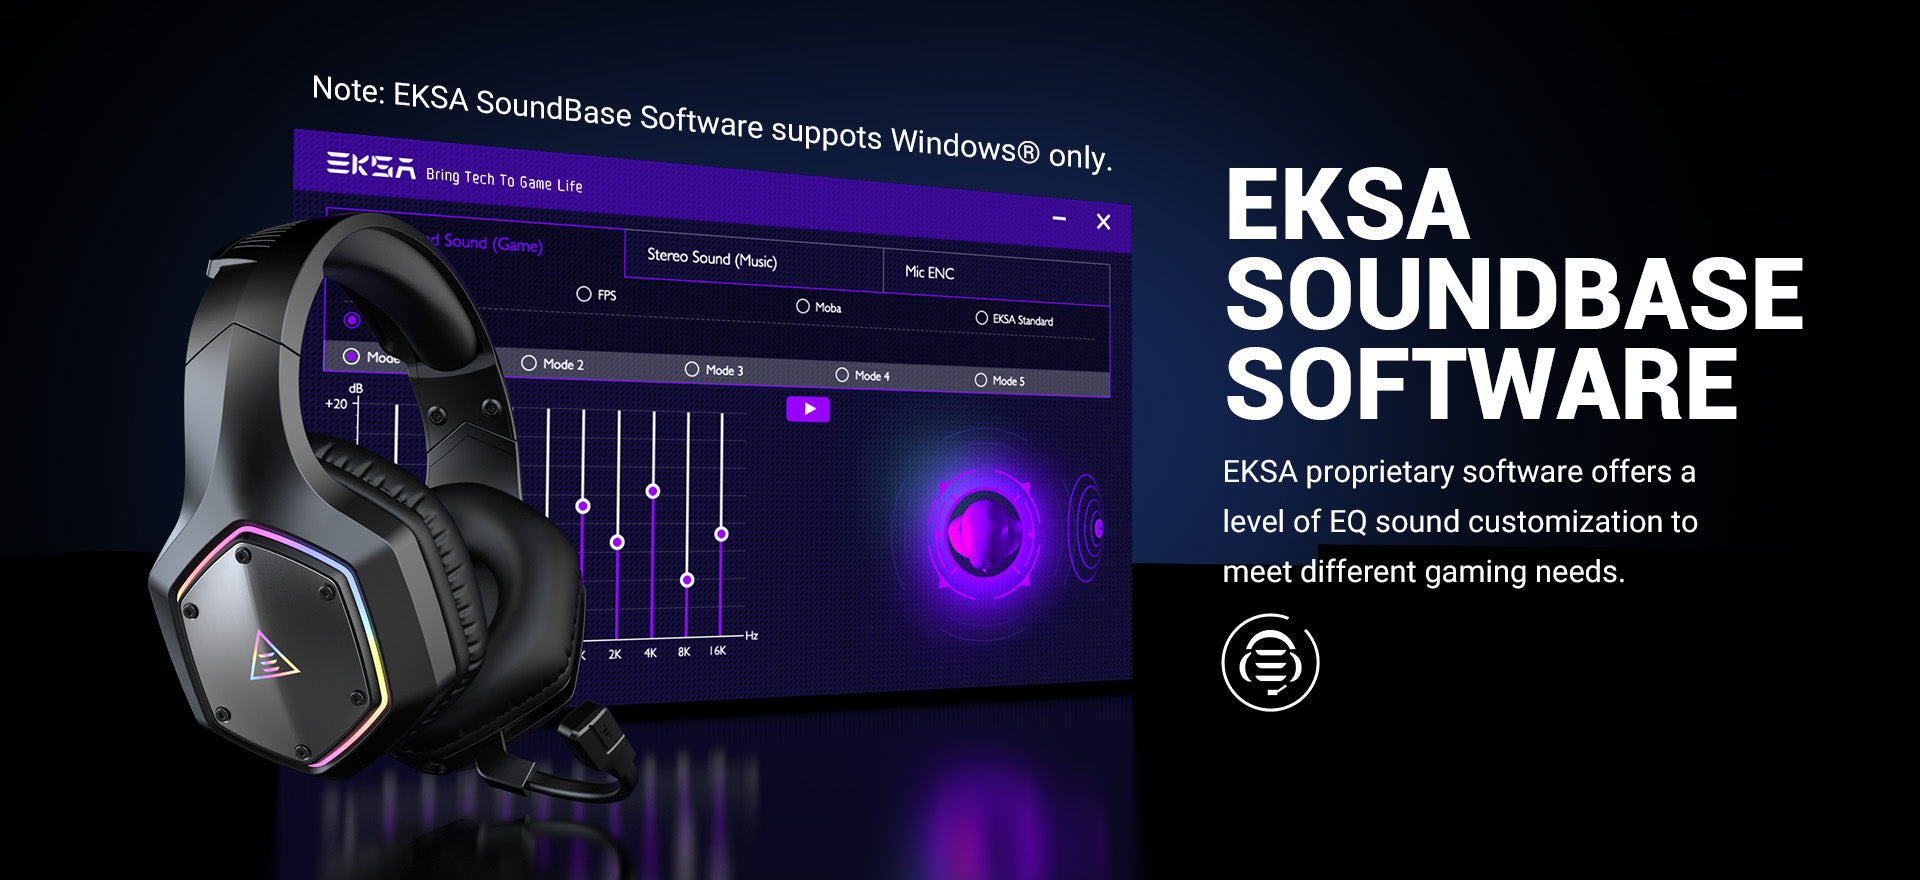 Exclusive software customized by EKSA for 2.4 g wireless gaming headset E1000 WT